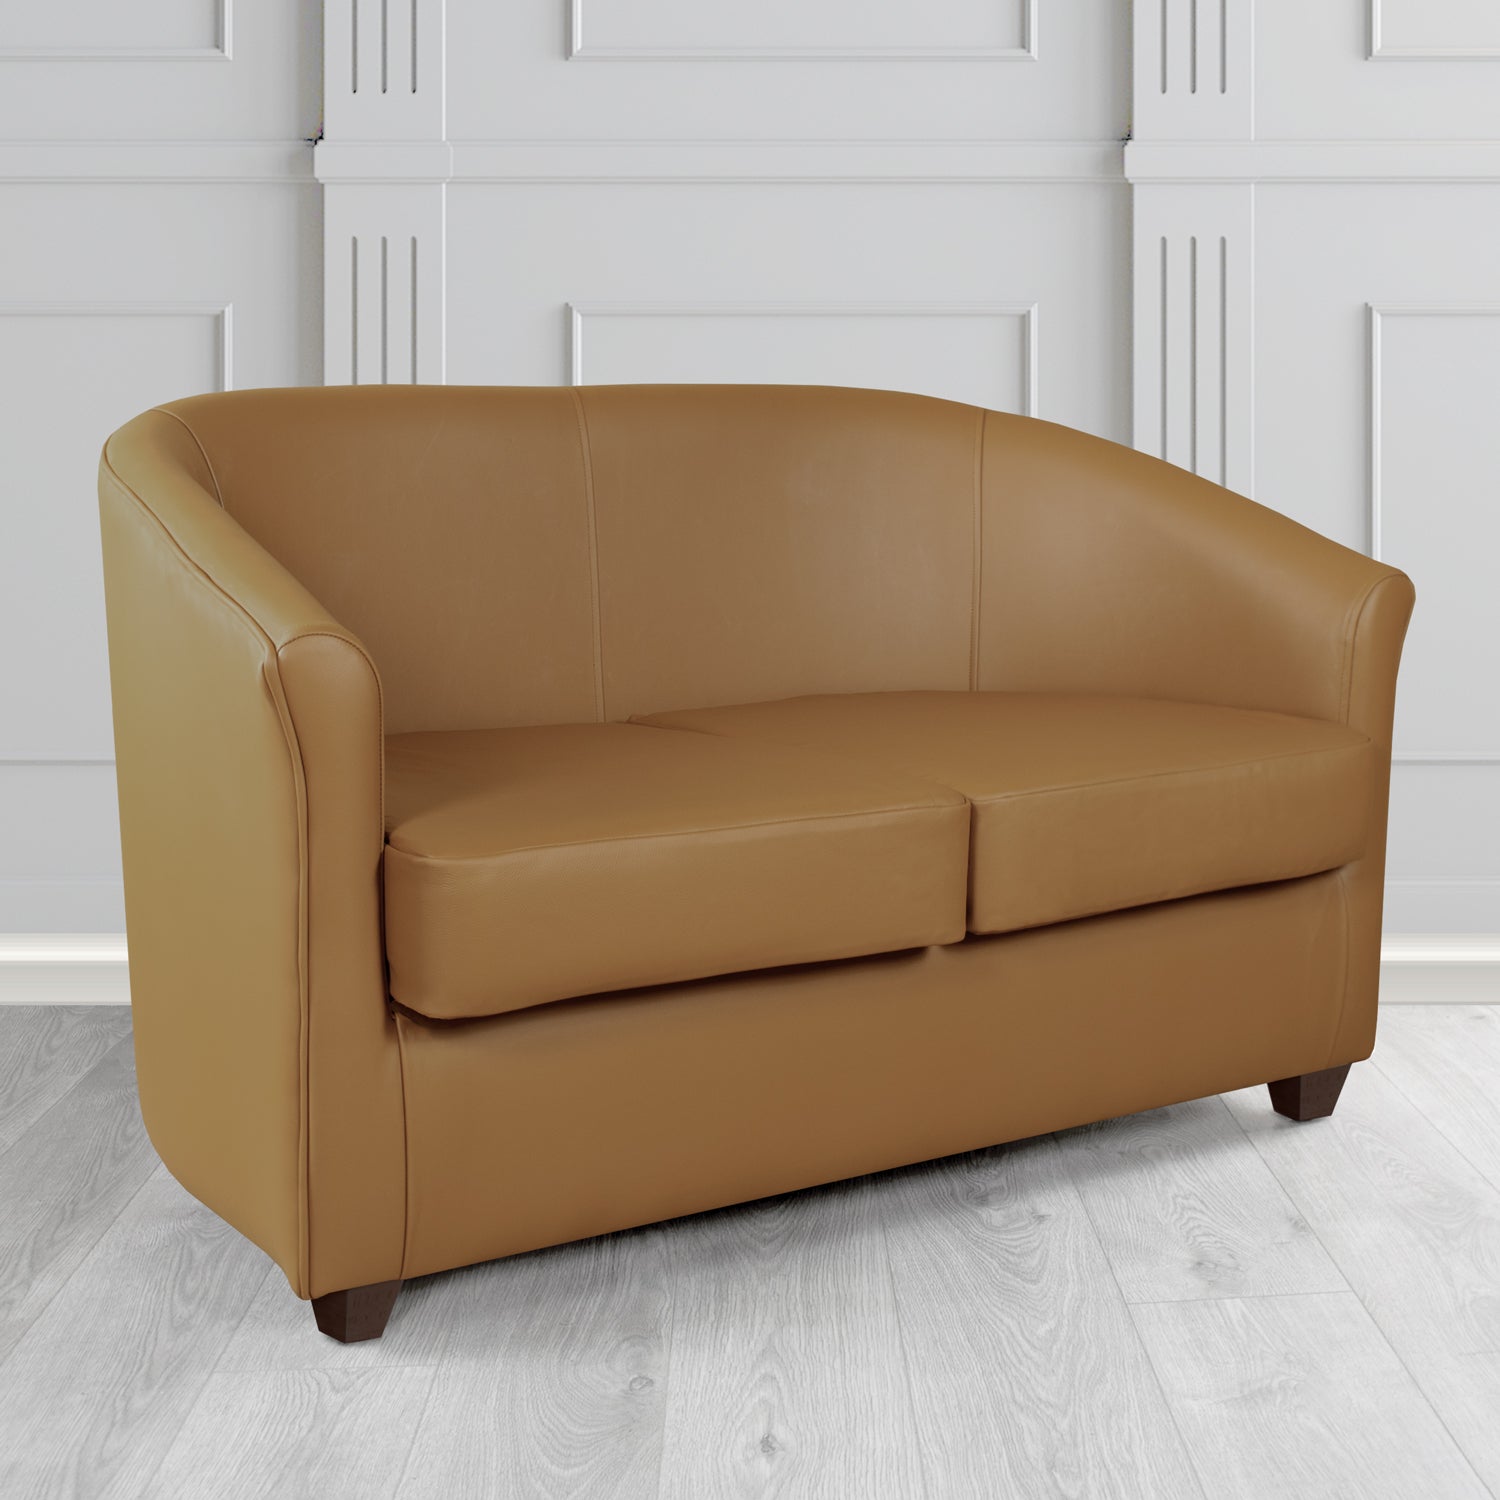 Cannes 2 Seater Tub Sofa in Just Colour Nutmeg Crib 5 Faux Leather - The Tub Chair Shop